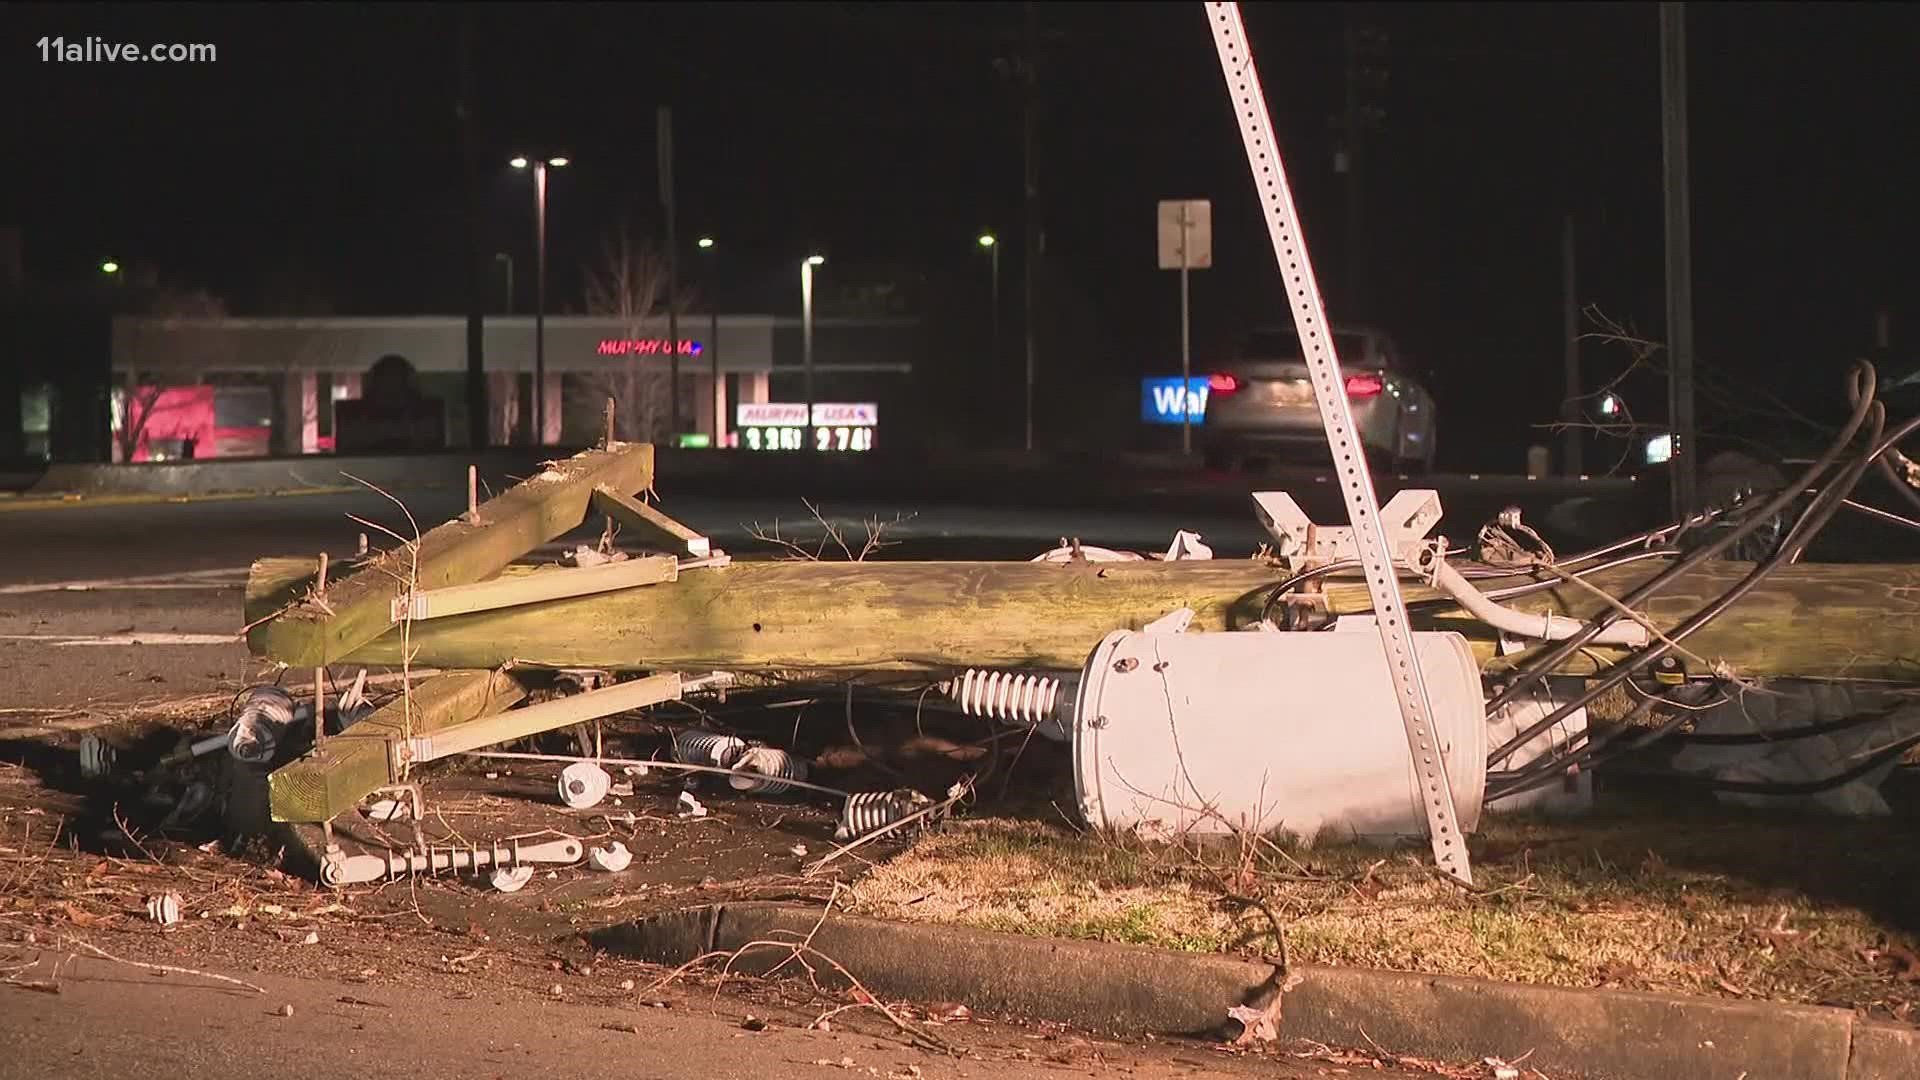 The National Weather Service also confirmed Friday evening that a tornado touched down in Newton County.